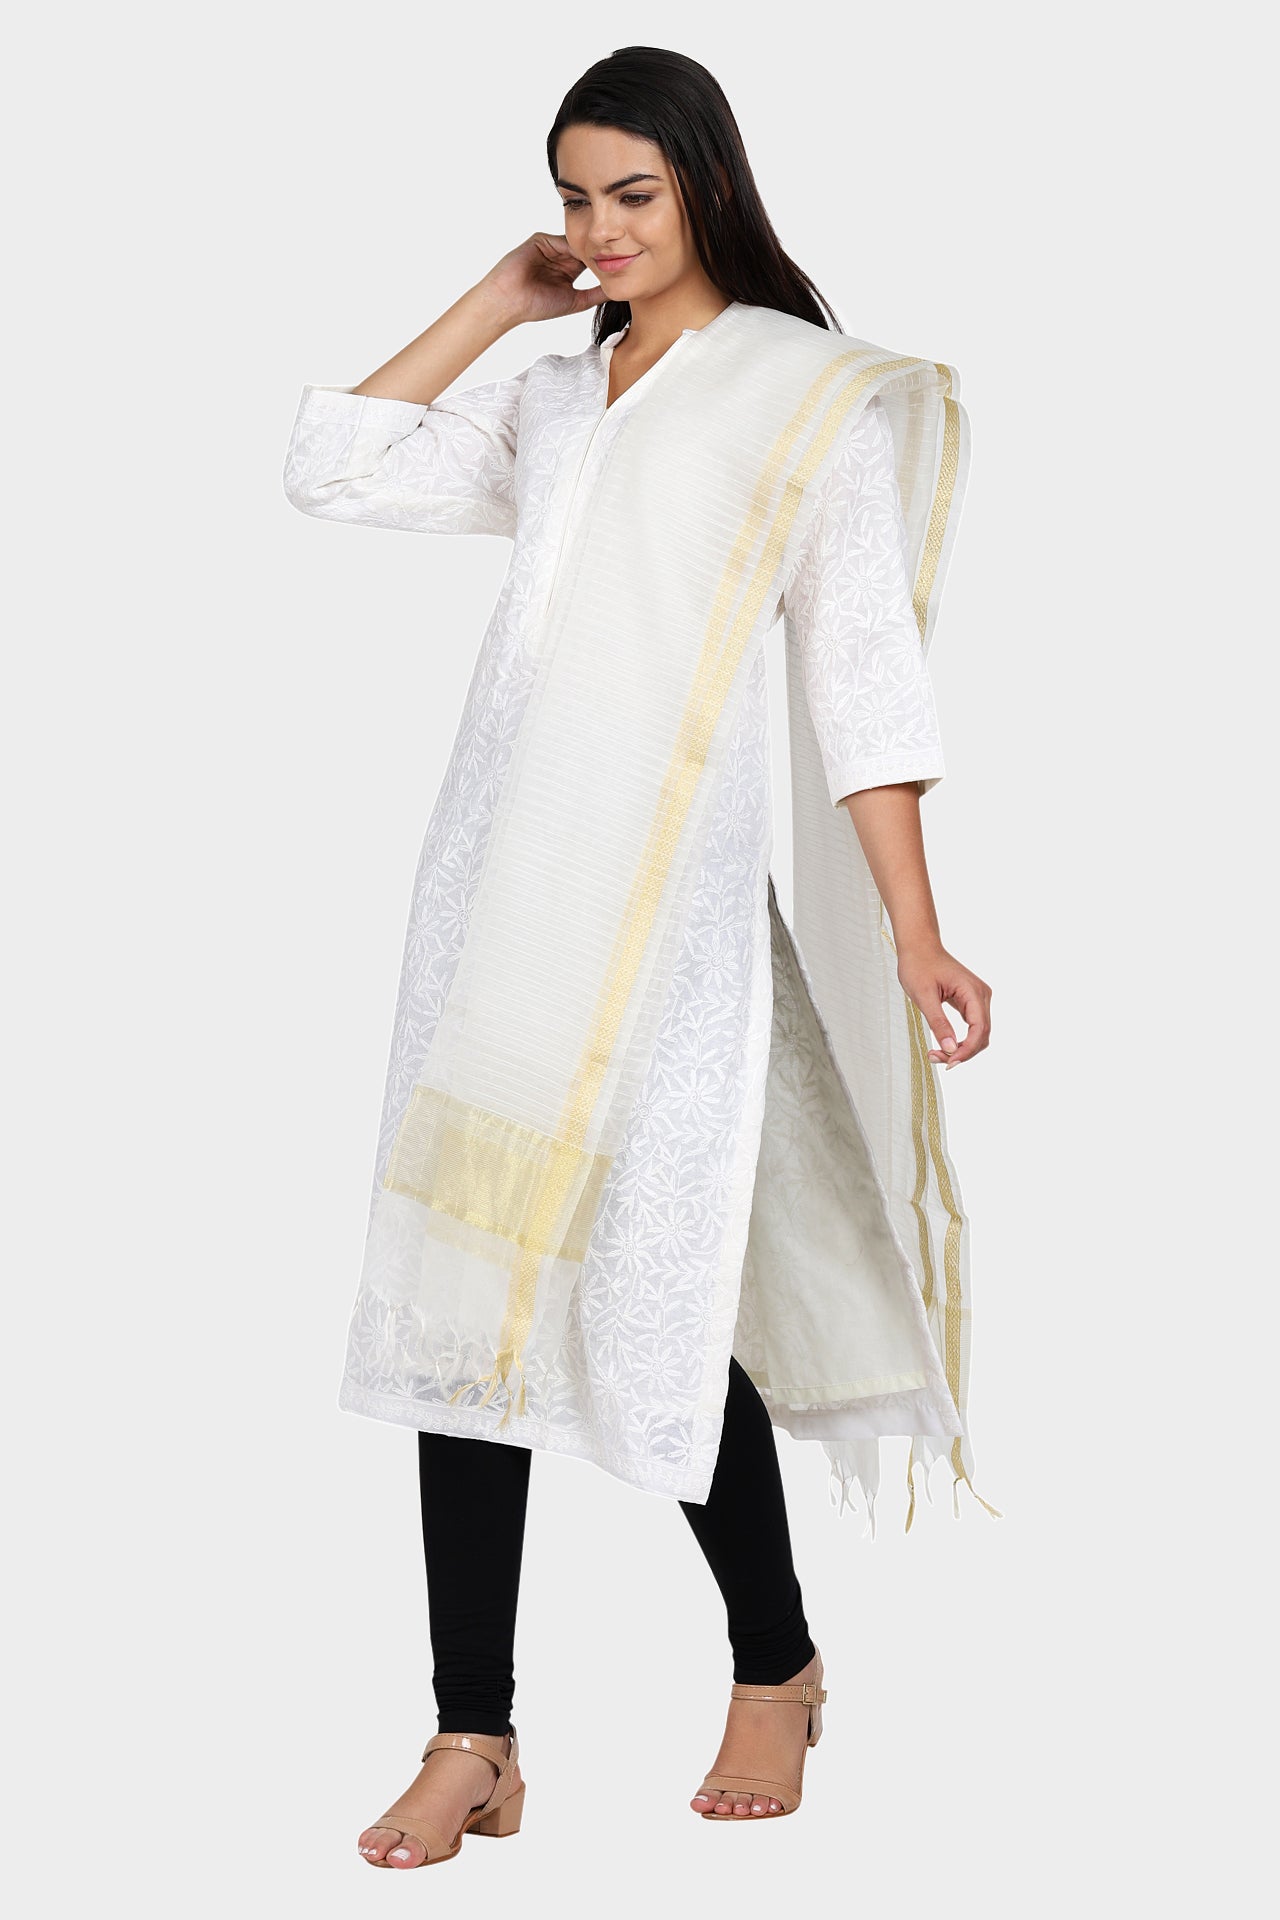 White and Golden Polyknit Cotton Dupatta with Tassled Ends